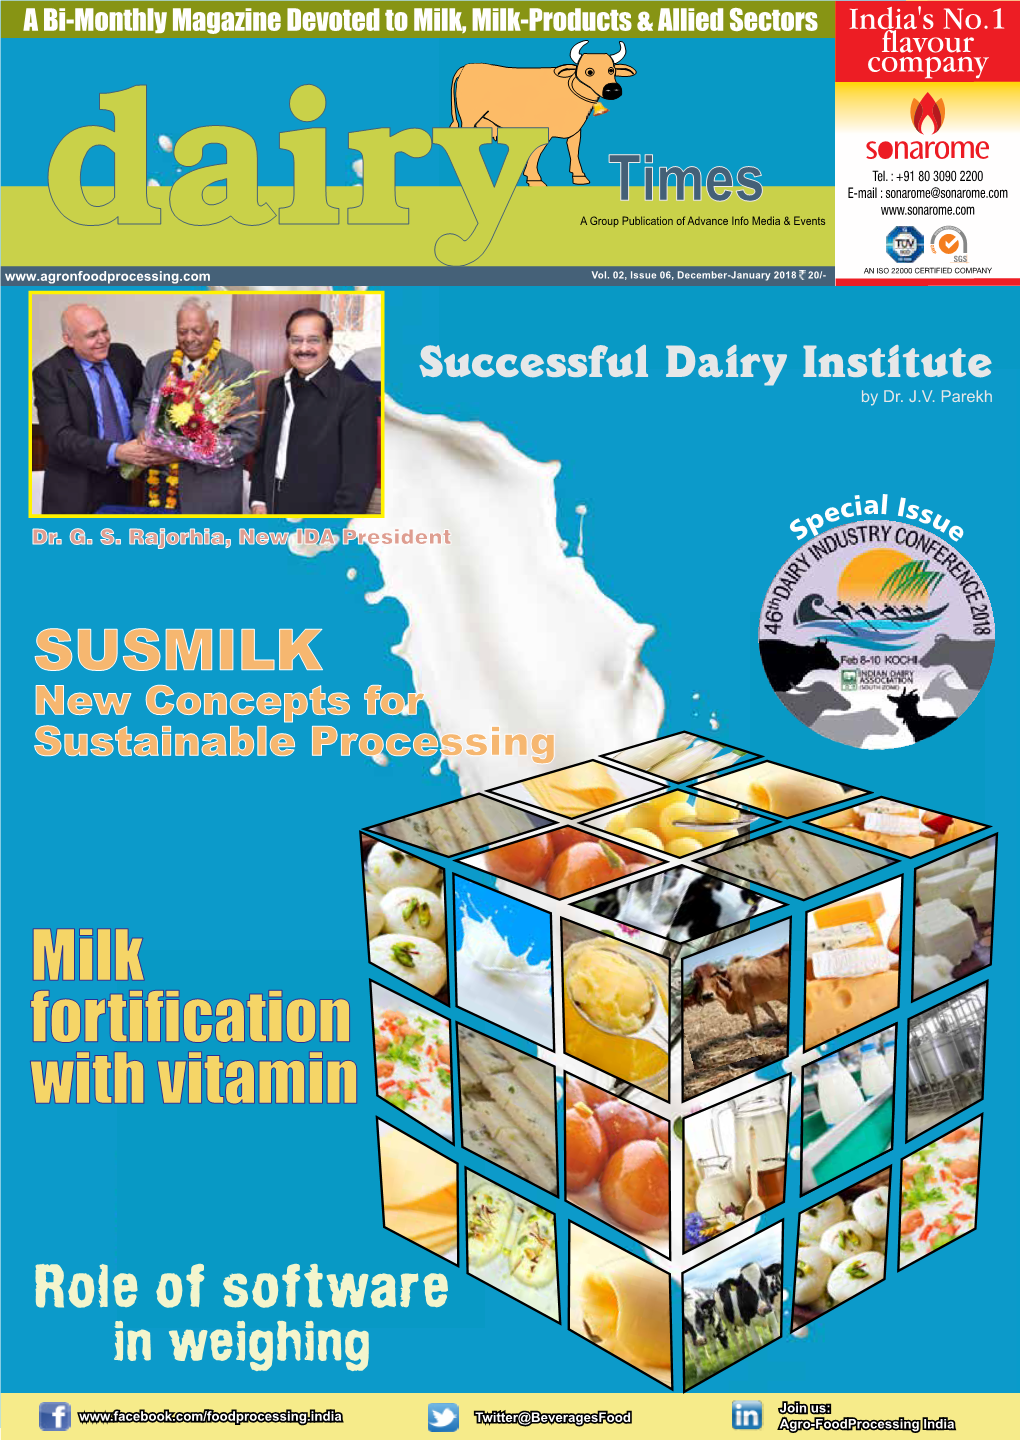 Milk Fortification with Vitamin A&D Reviewed by Dr